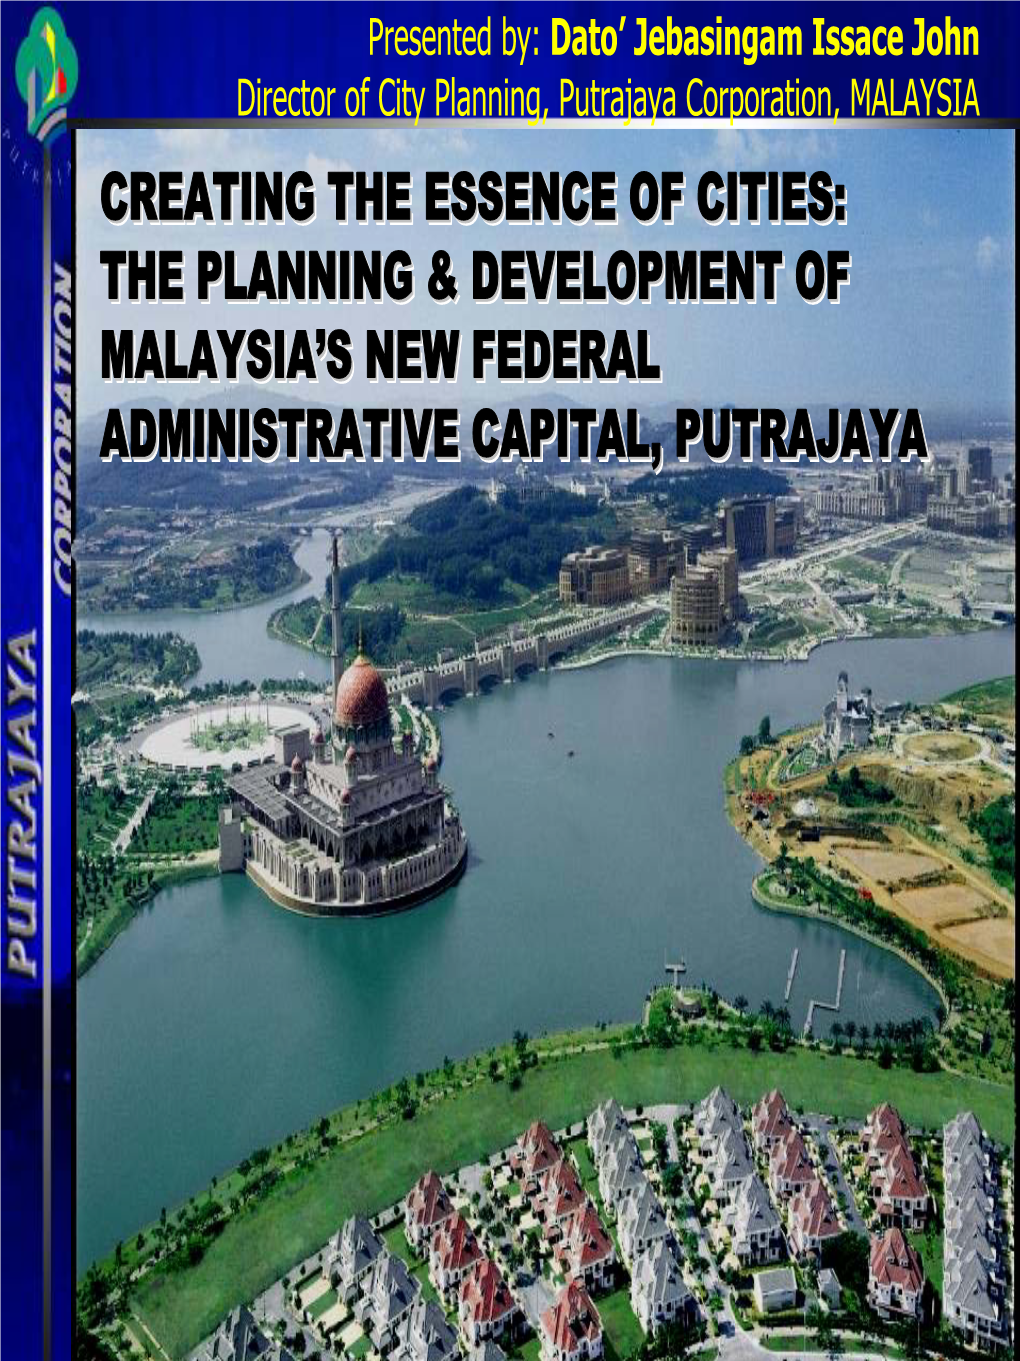 The Planning & Development of Malaysia's New Federal